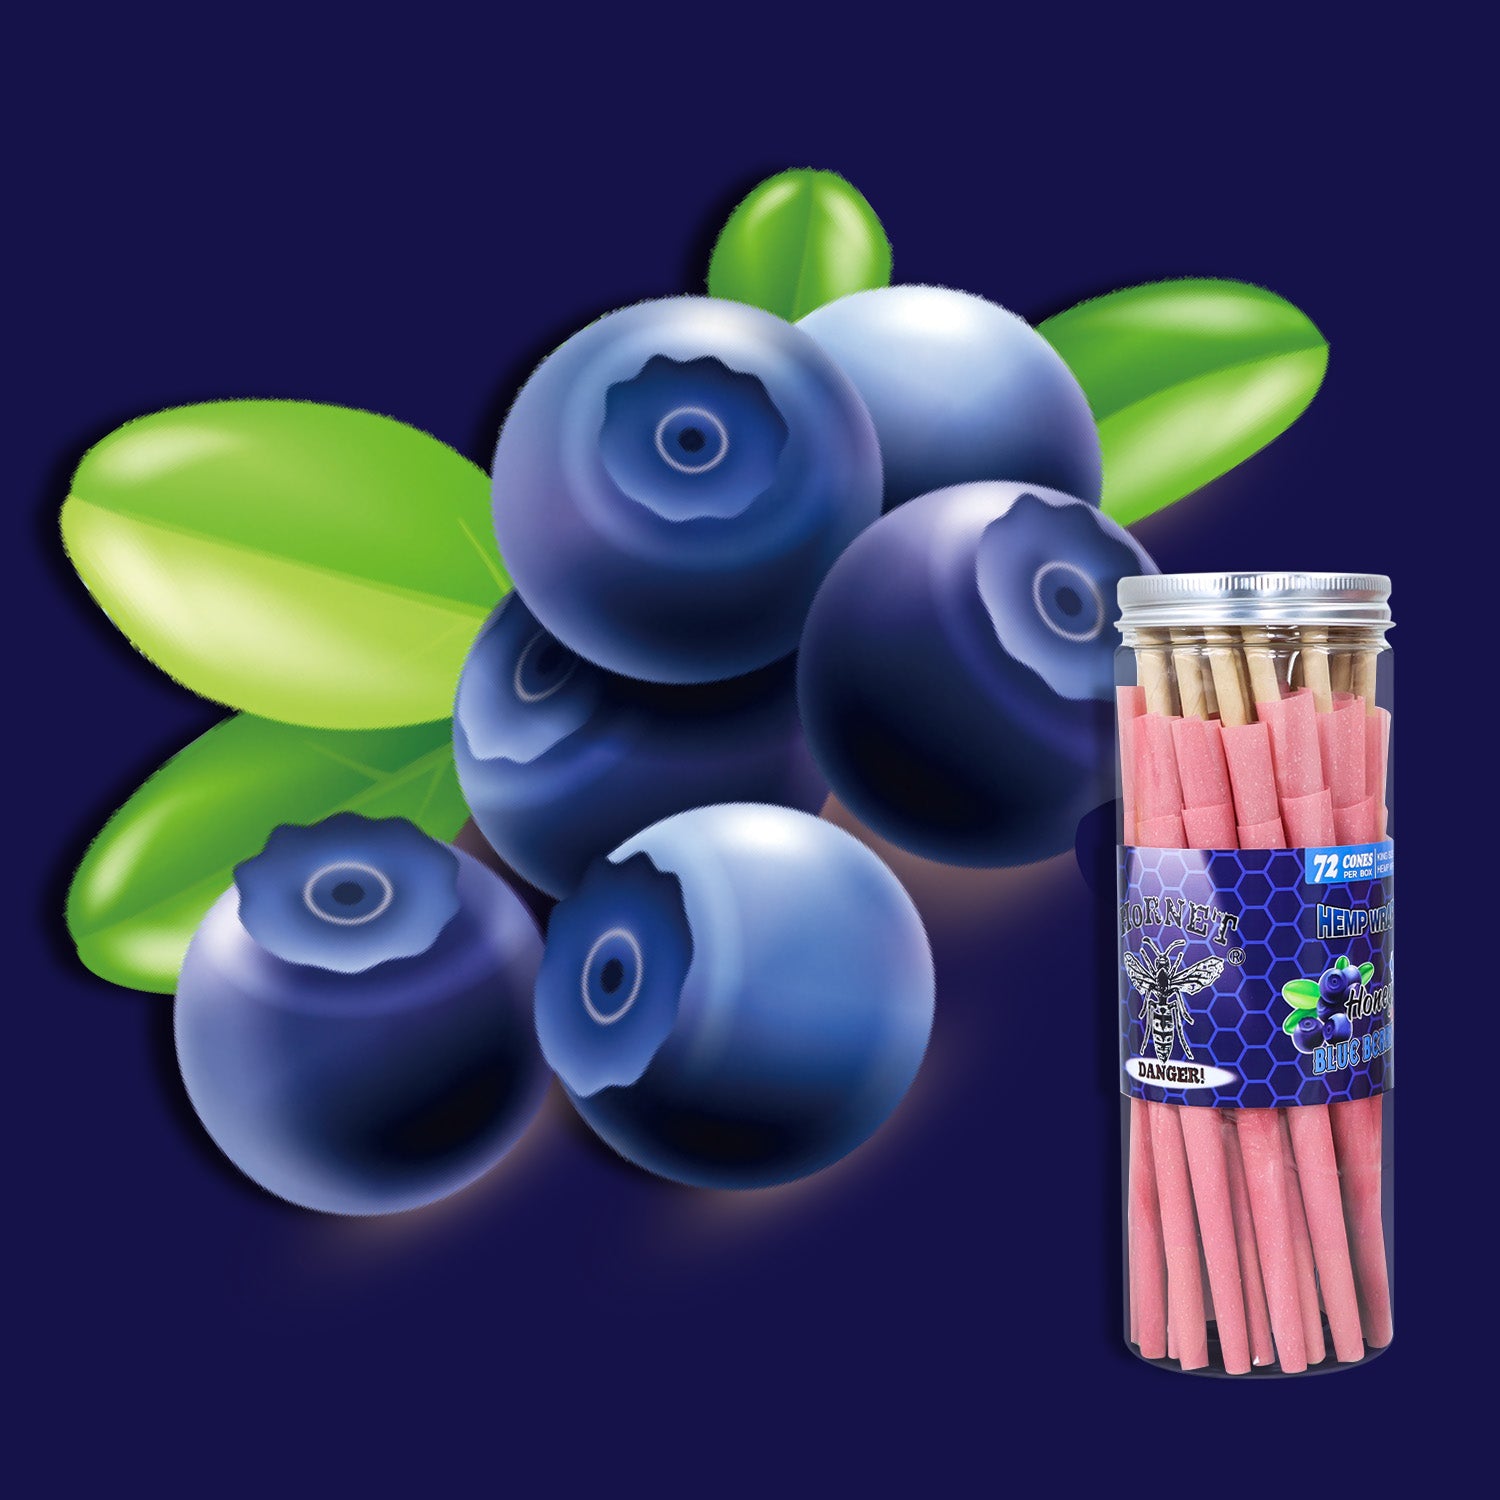 HORNET Blueberry Flavored Pink Pre Rolled Cones, King Size Pre Rolled Rolling Paper with tips, Slow Burning Rolling Cones & load, 72 PCS / Jar